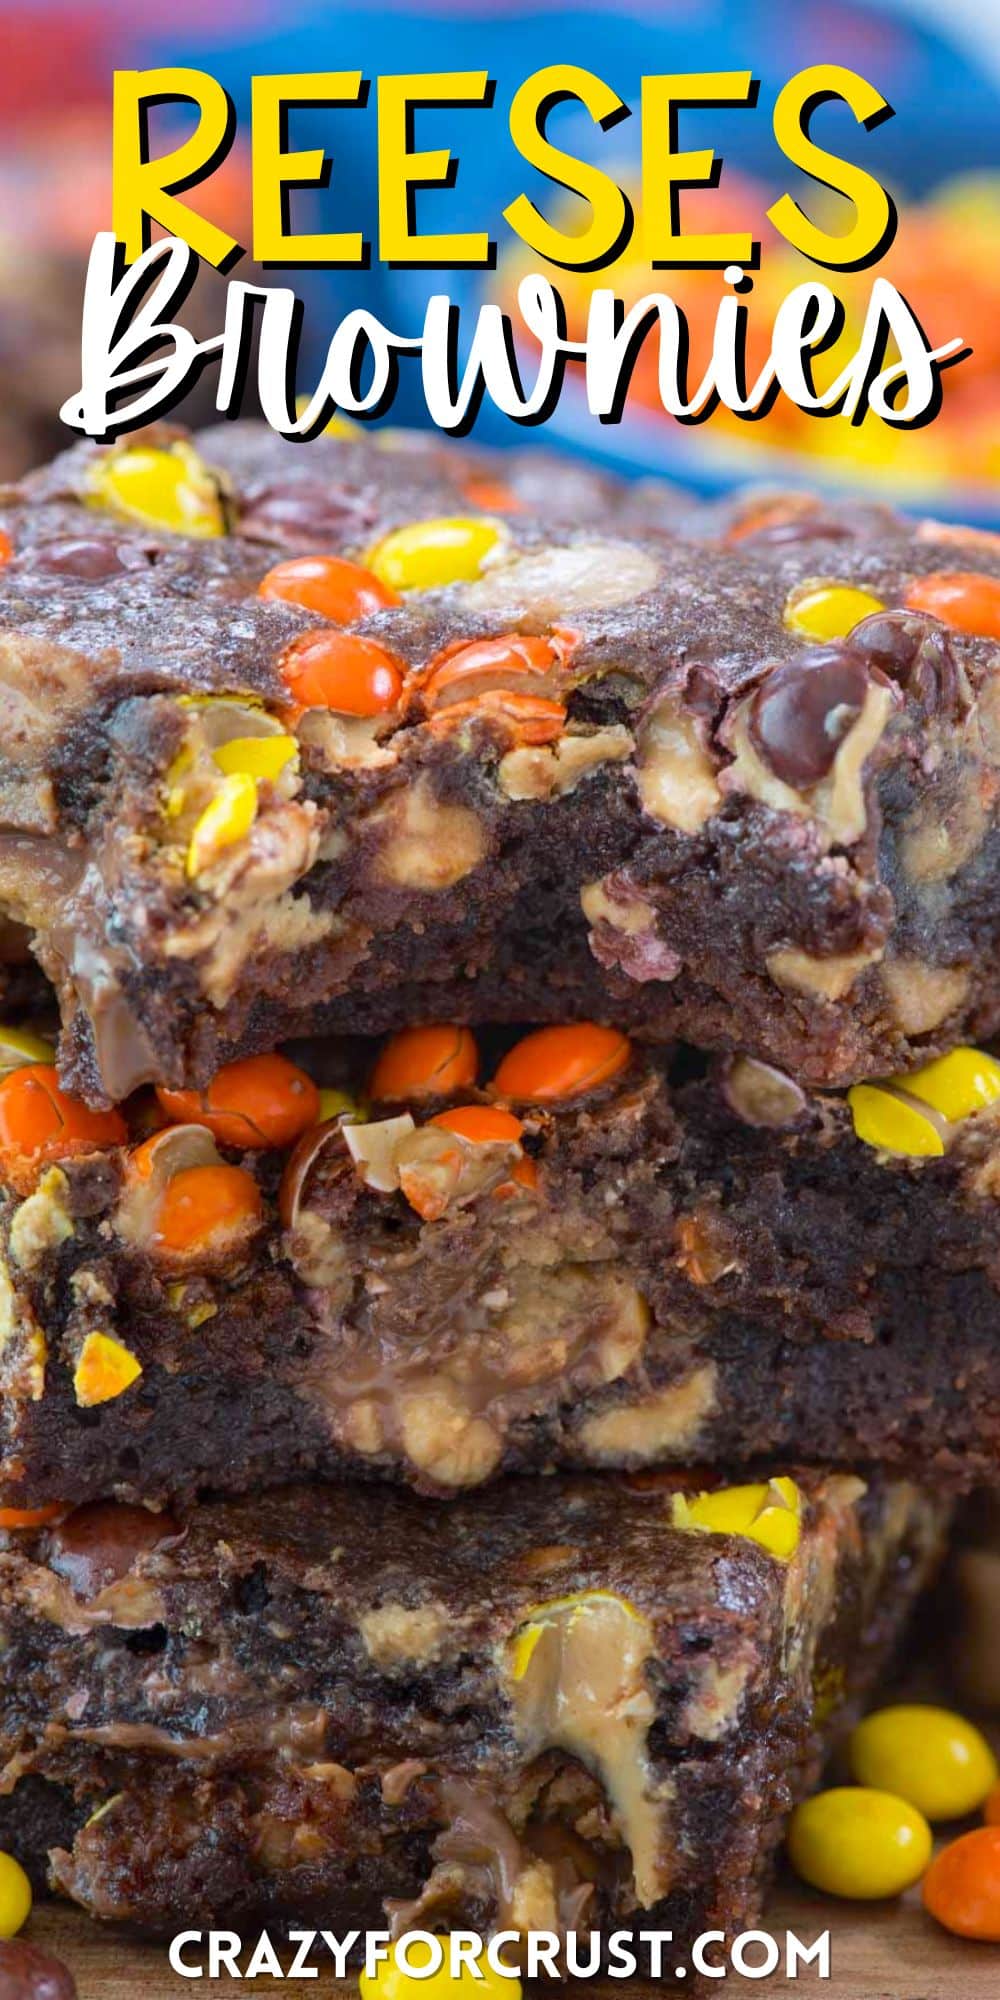 stacked brownies with yellow and orange reeses pieces baked inside with words on the image.